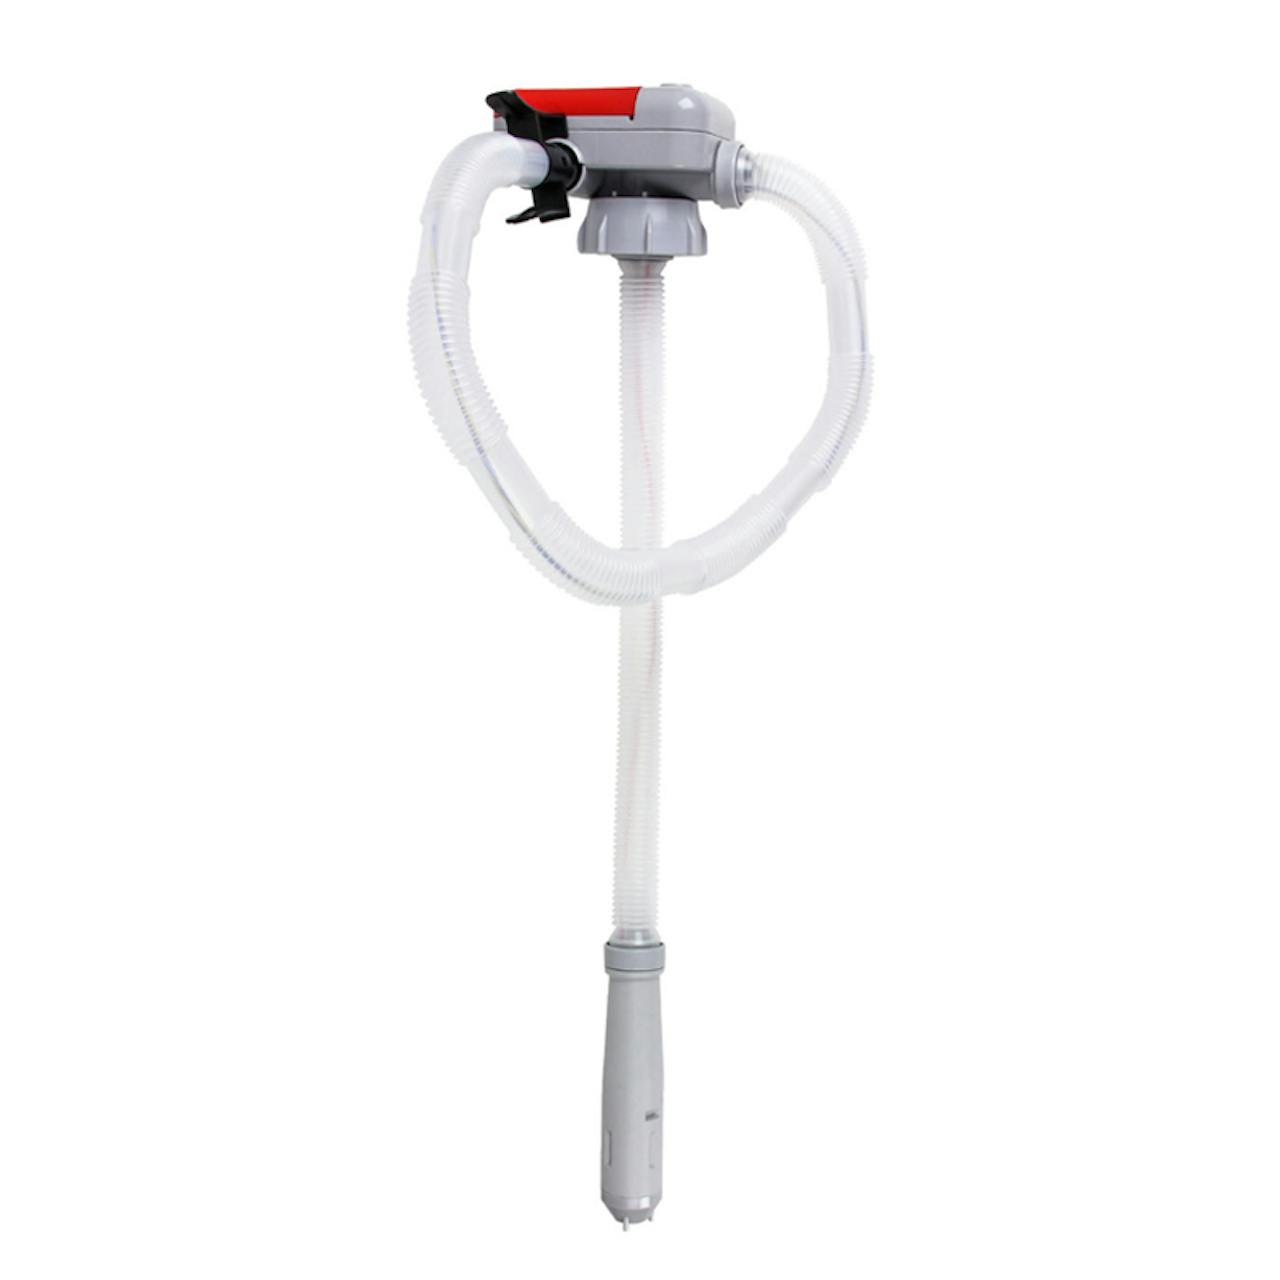 TERA PUMP XL 4 AA Battery Powered Fuel Transfer Pump with Auto